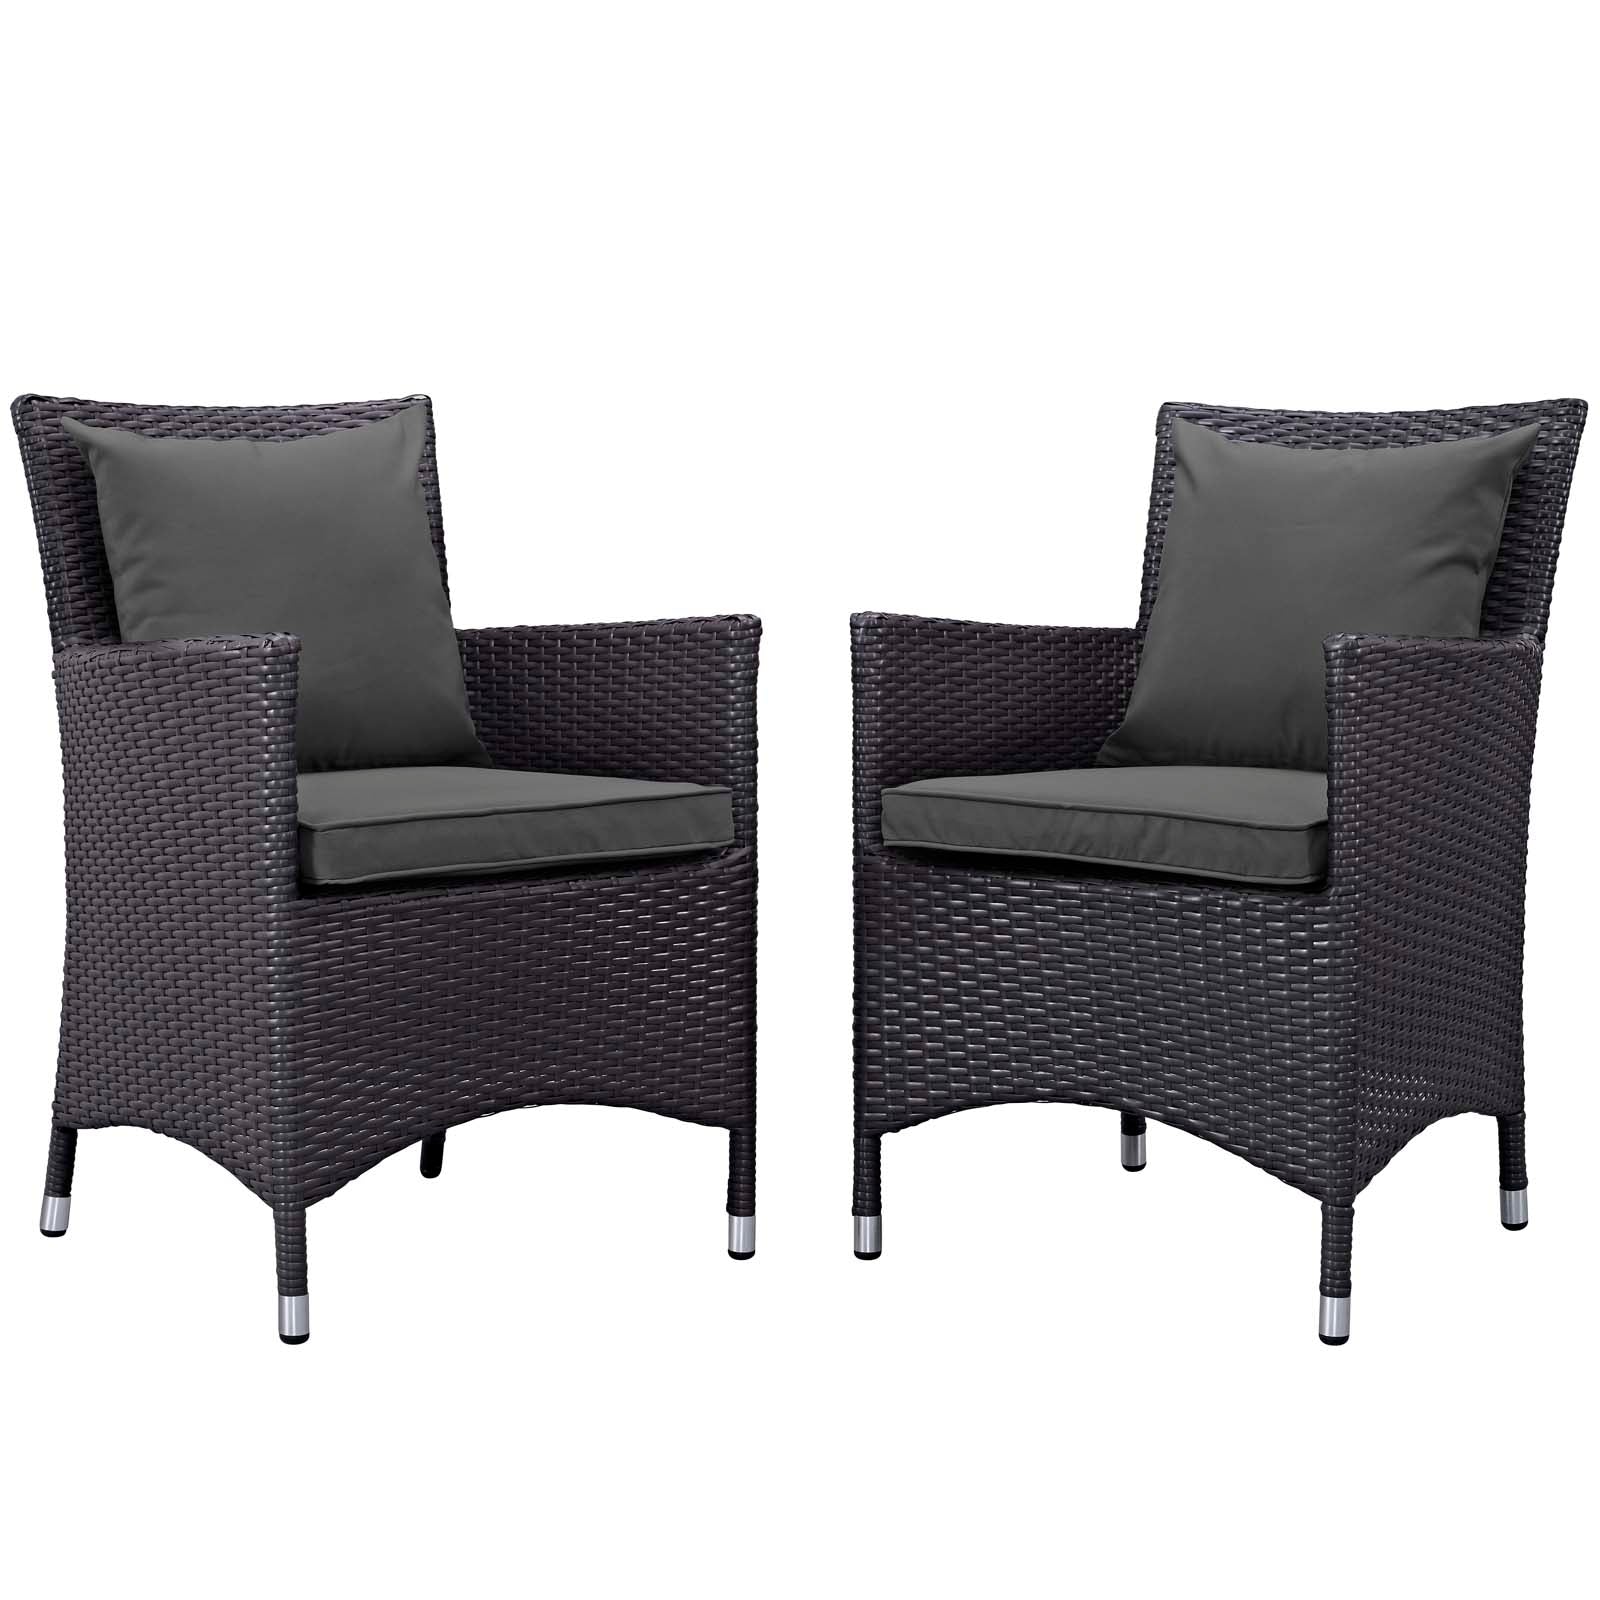 Convene 2 Piece Outdoor Patio Dining Set-Outdoor Dining Set-Modway-Wall2Wall Furnishings